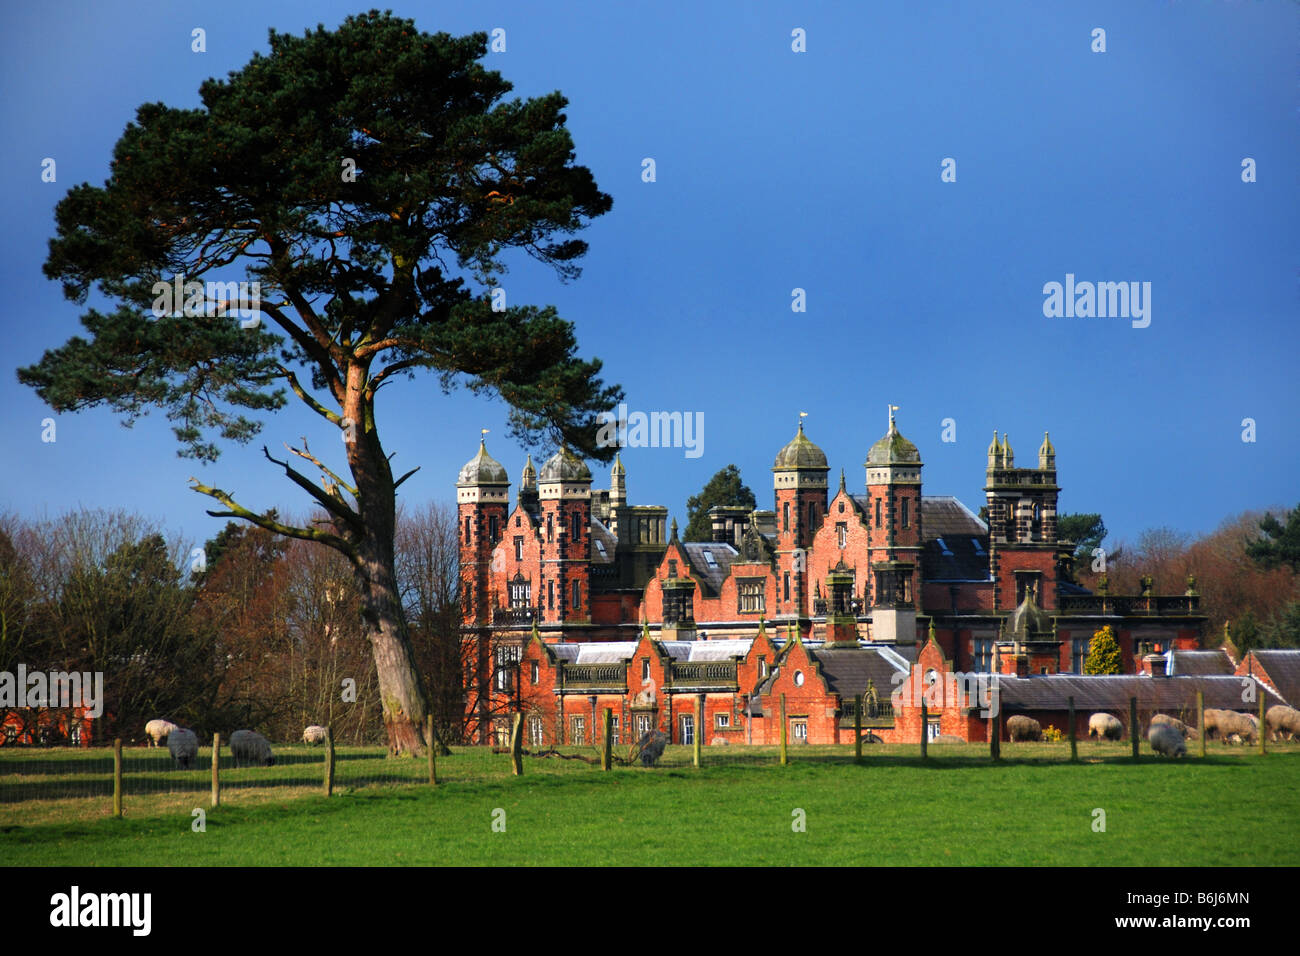 Capesthorne Hall, cheshire, english mansion Stock Photo